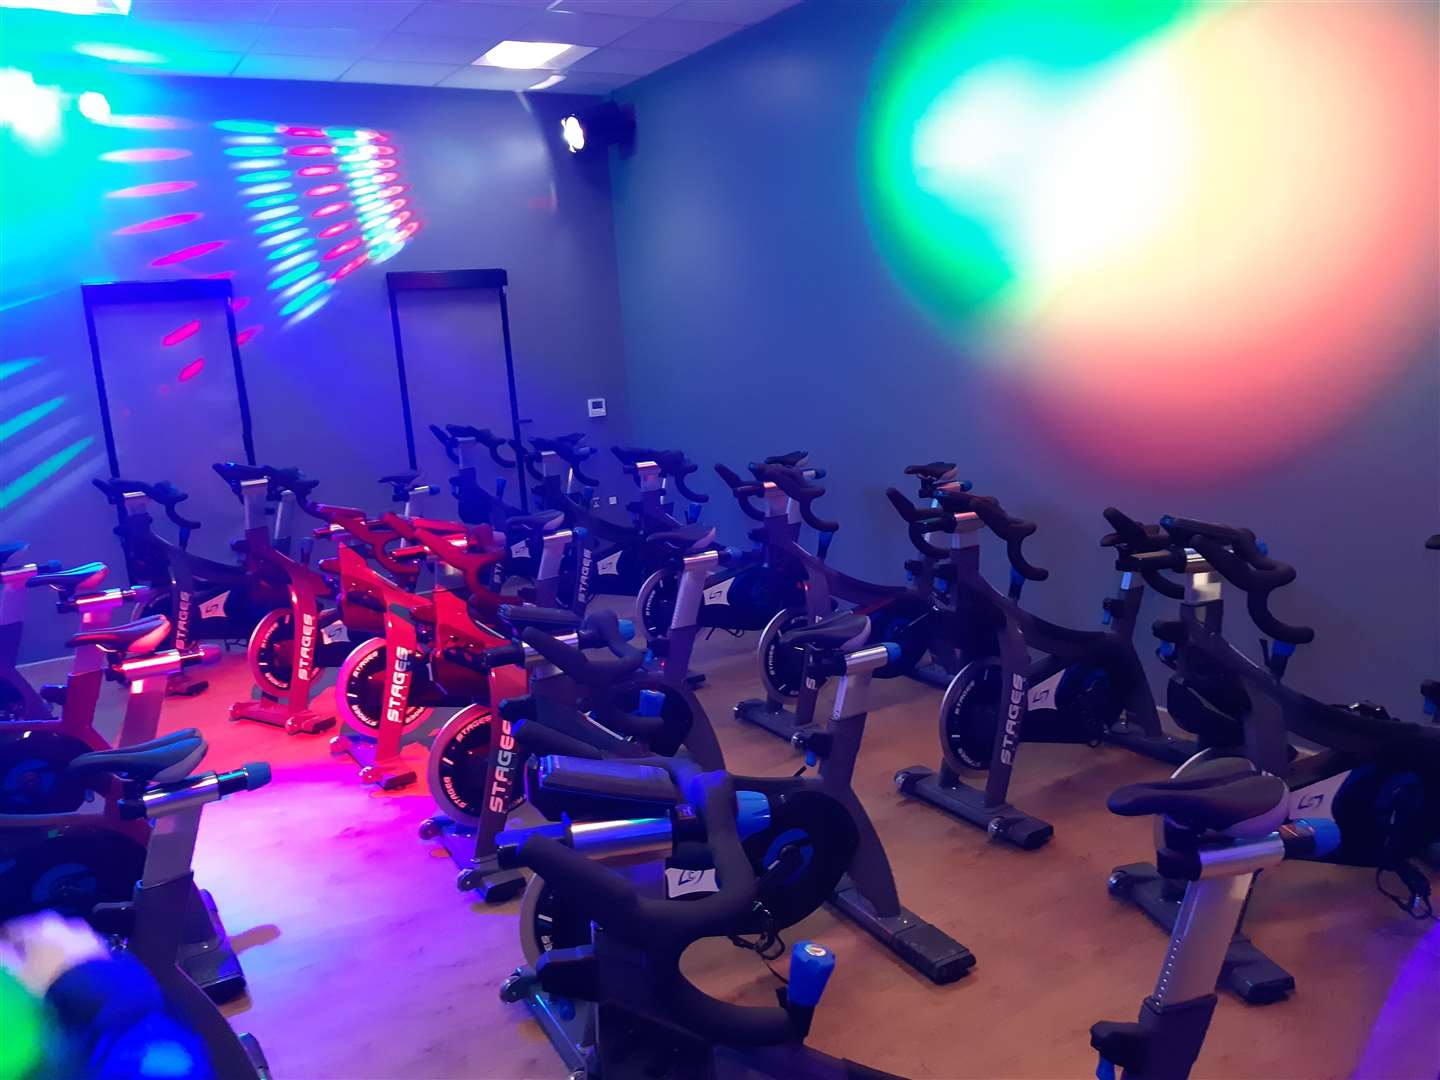 The exercise bikes room